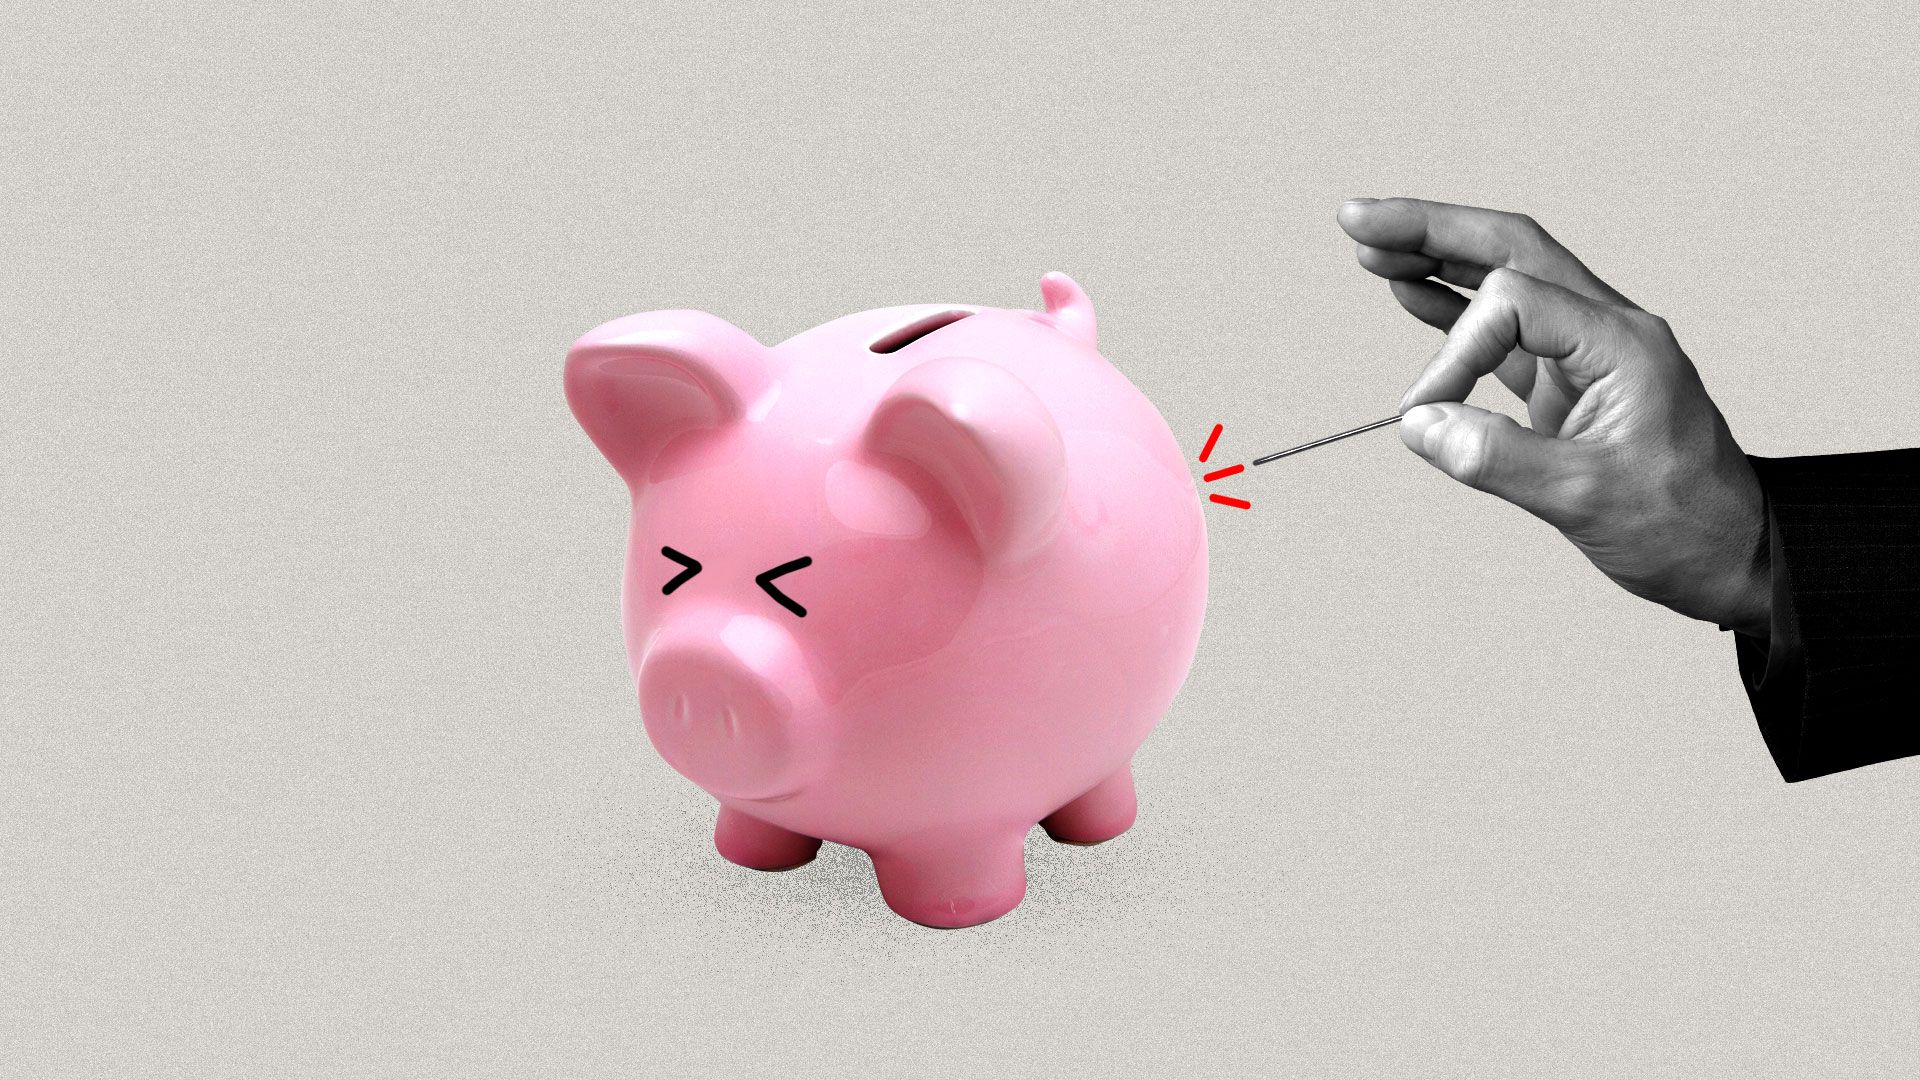 In this illustration, a piggy bank is poked with a needle by a man wearing a suit